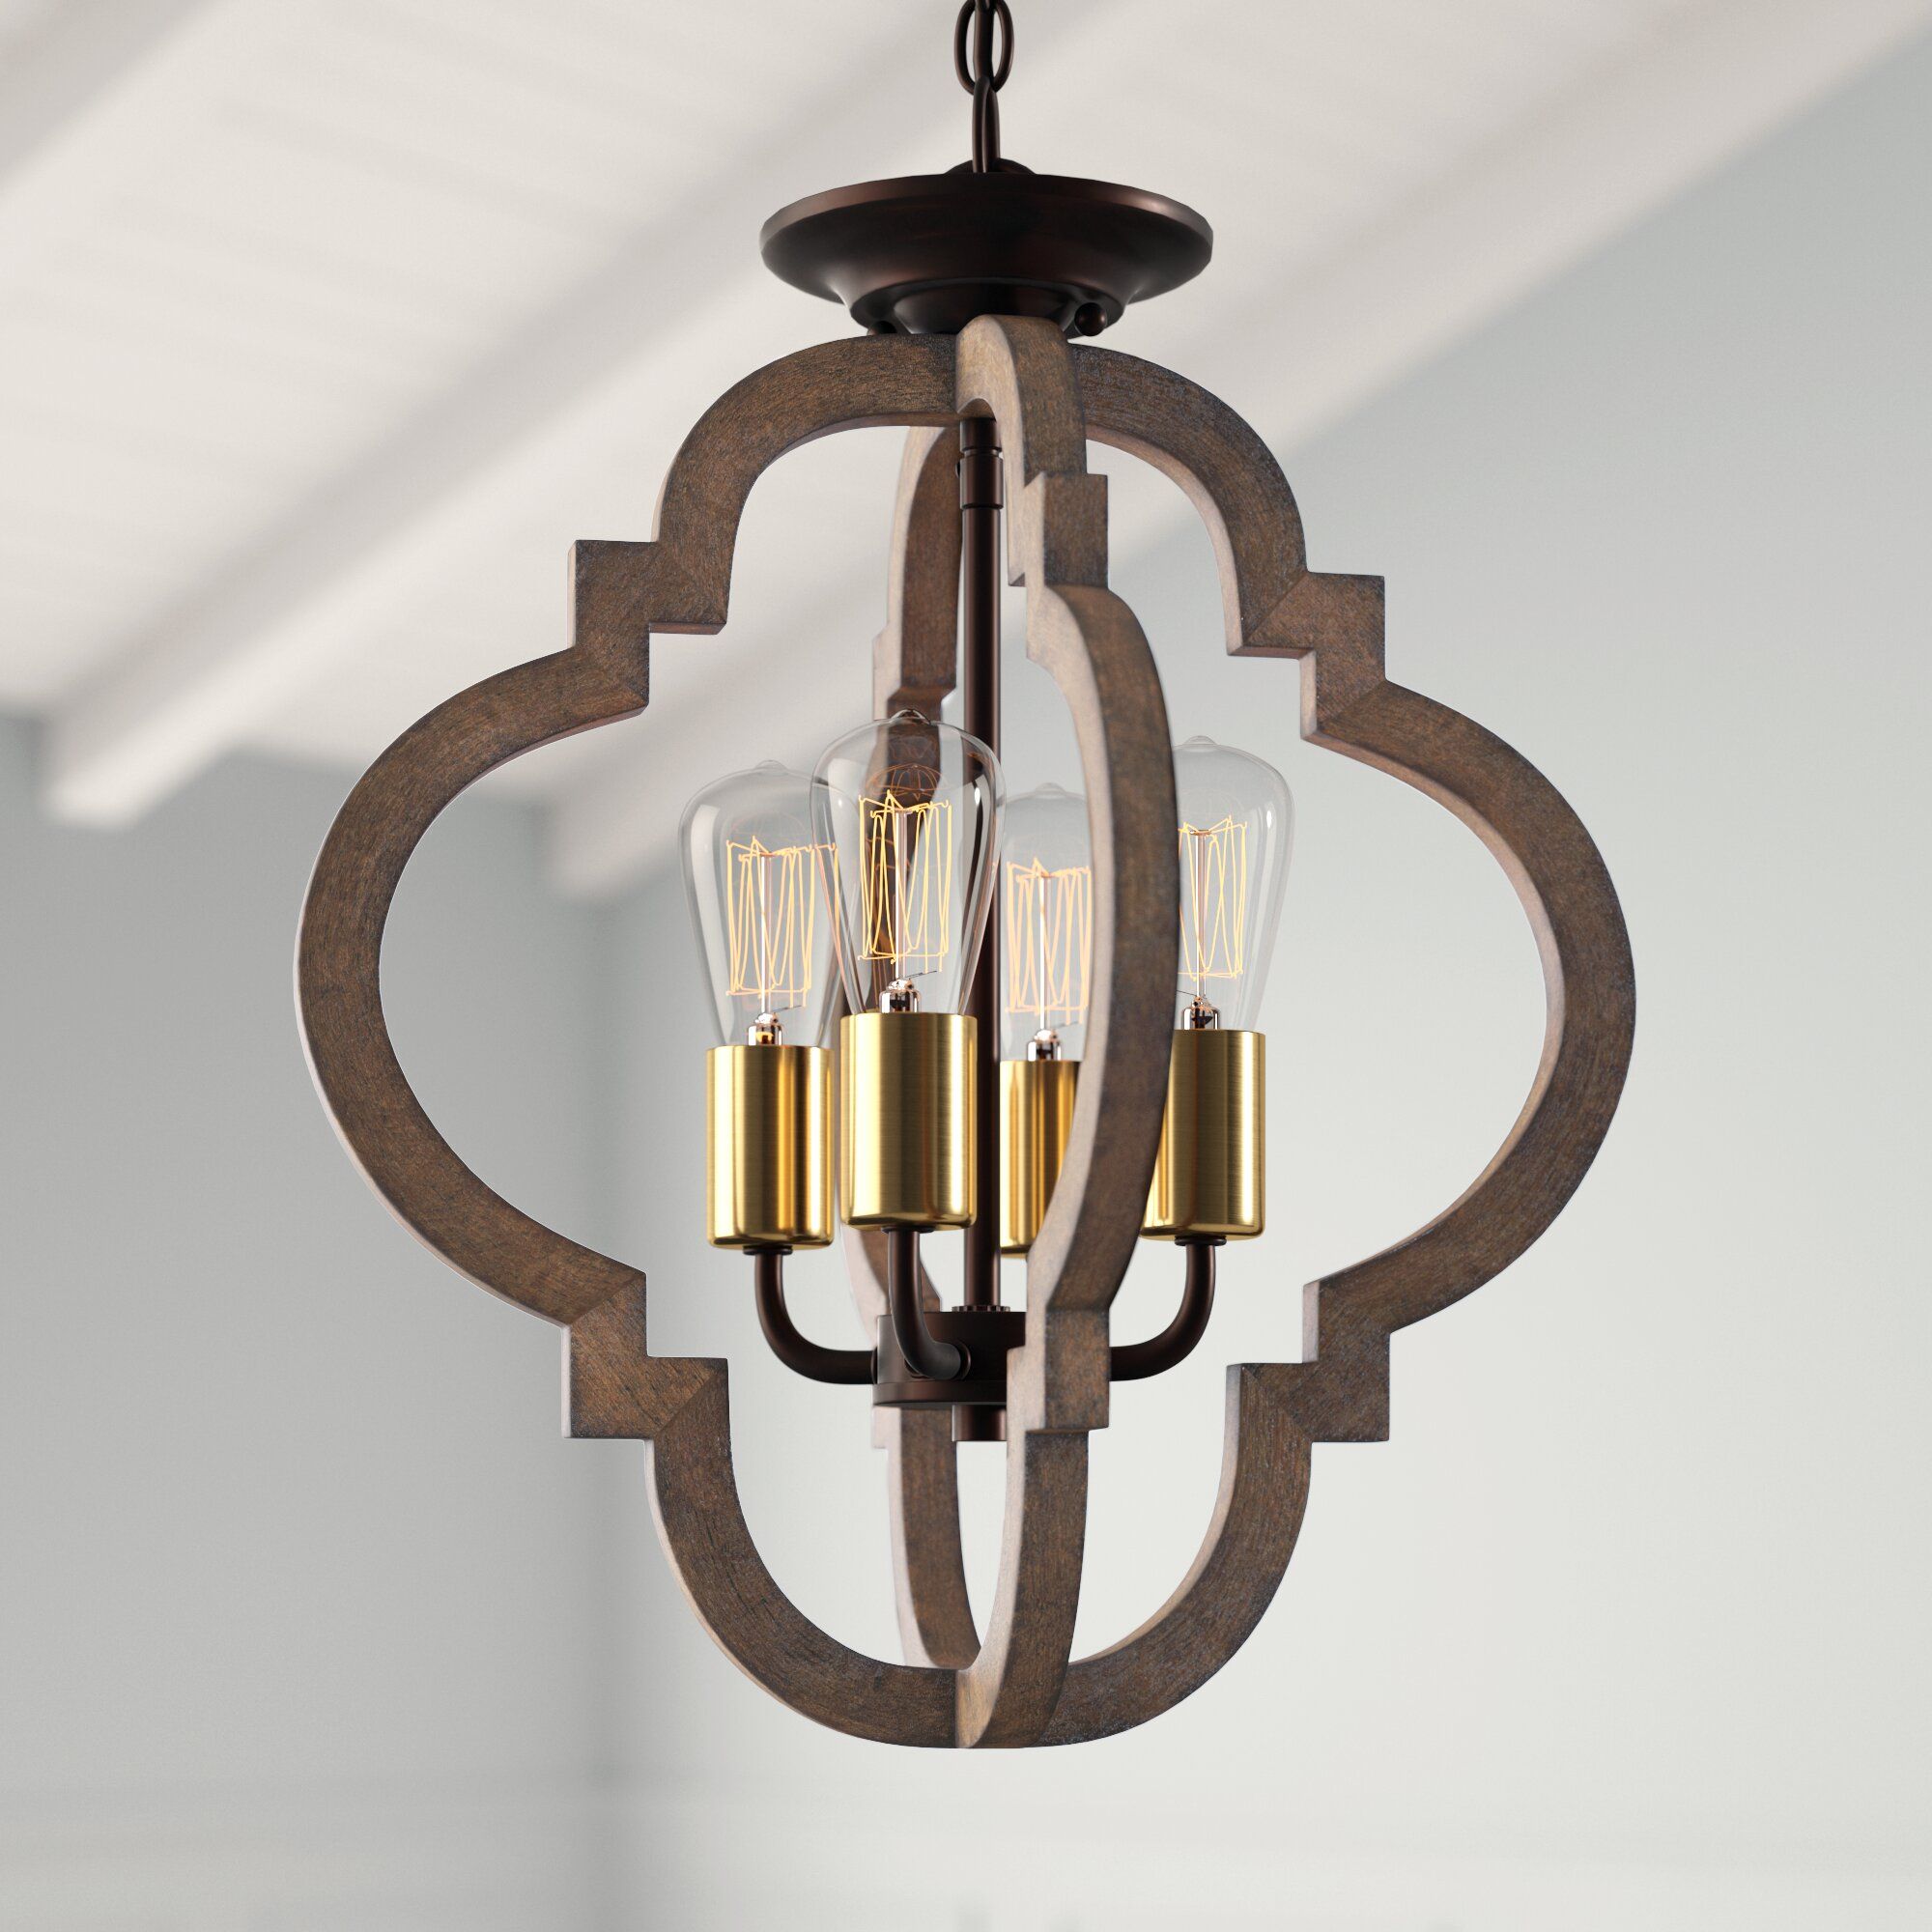 Kaycee 4 Light Geometric Chandelier Intended For Phifer 6 Light Empire Chandeliers (View 25 of 30)